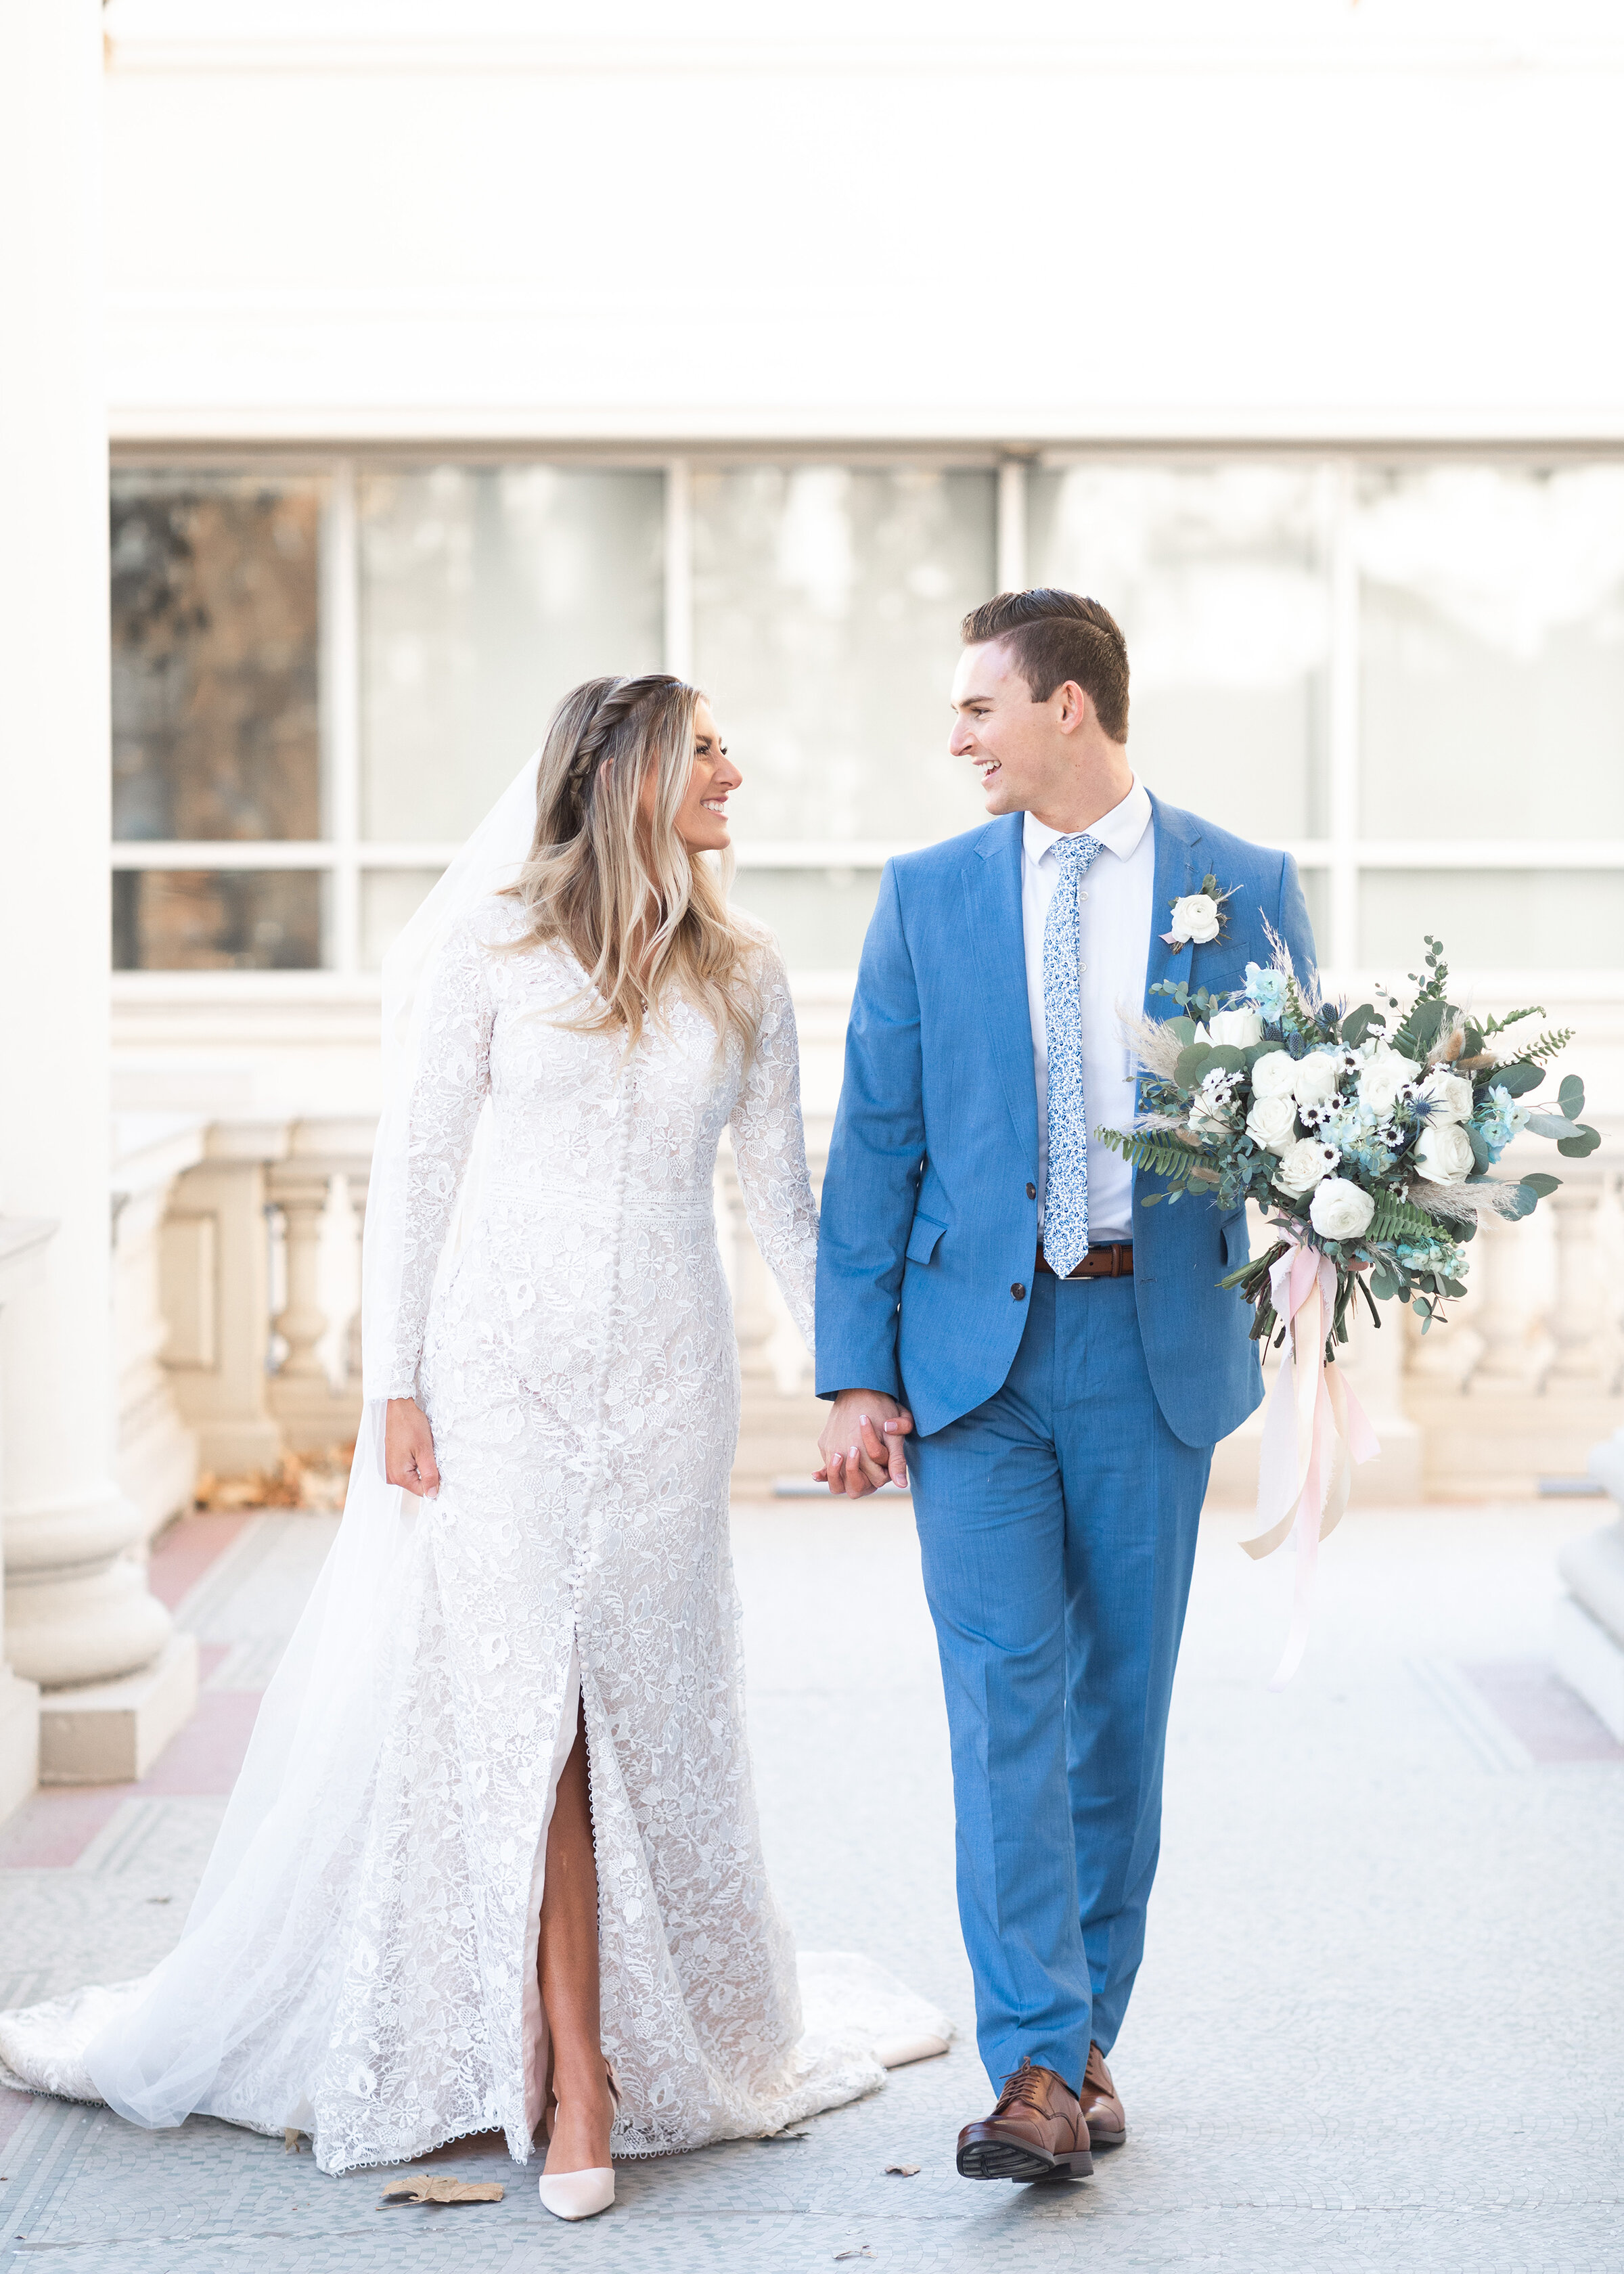  Clarity Lane Photography captures bride and groom hand-in-hand strolling outside the Monson Center in Salt Lake City, Utah. long sleeved beaded lace wedding dress, front slit in wedding dress, long blonde balayage half up bridal hair, long bridal ve